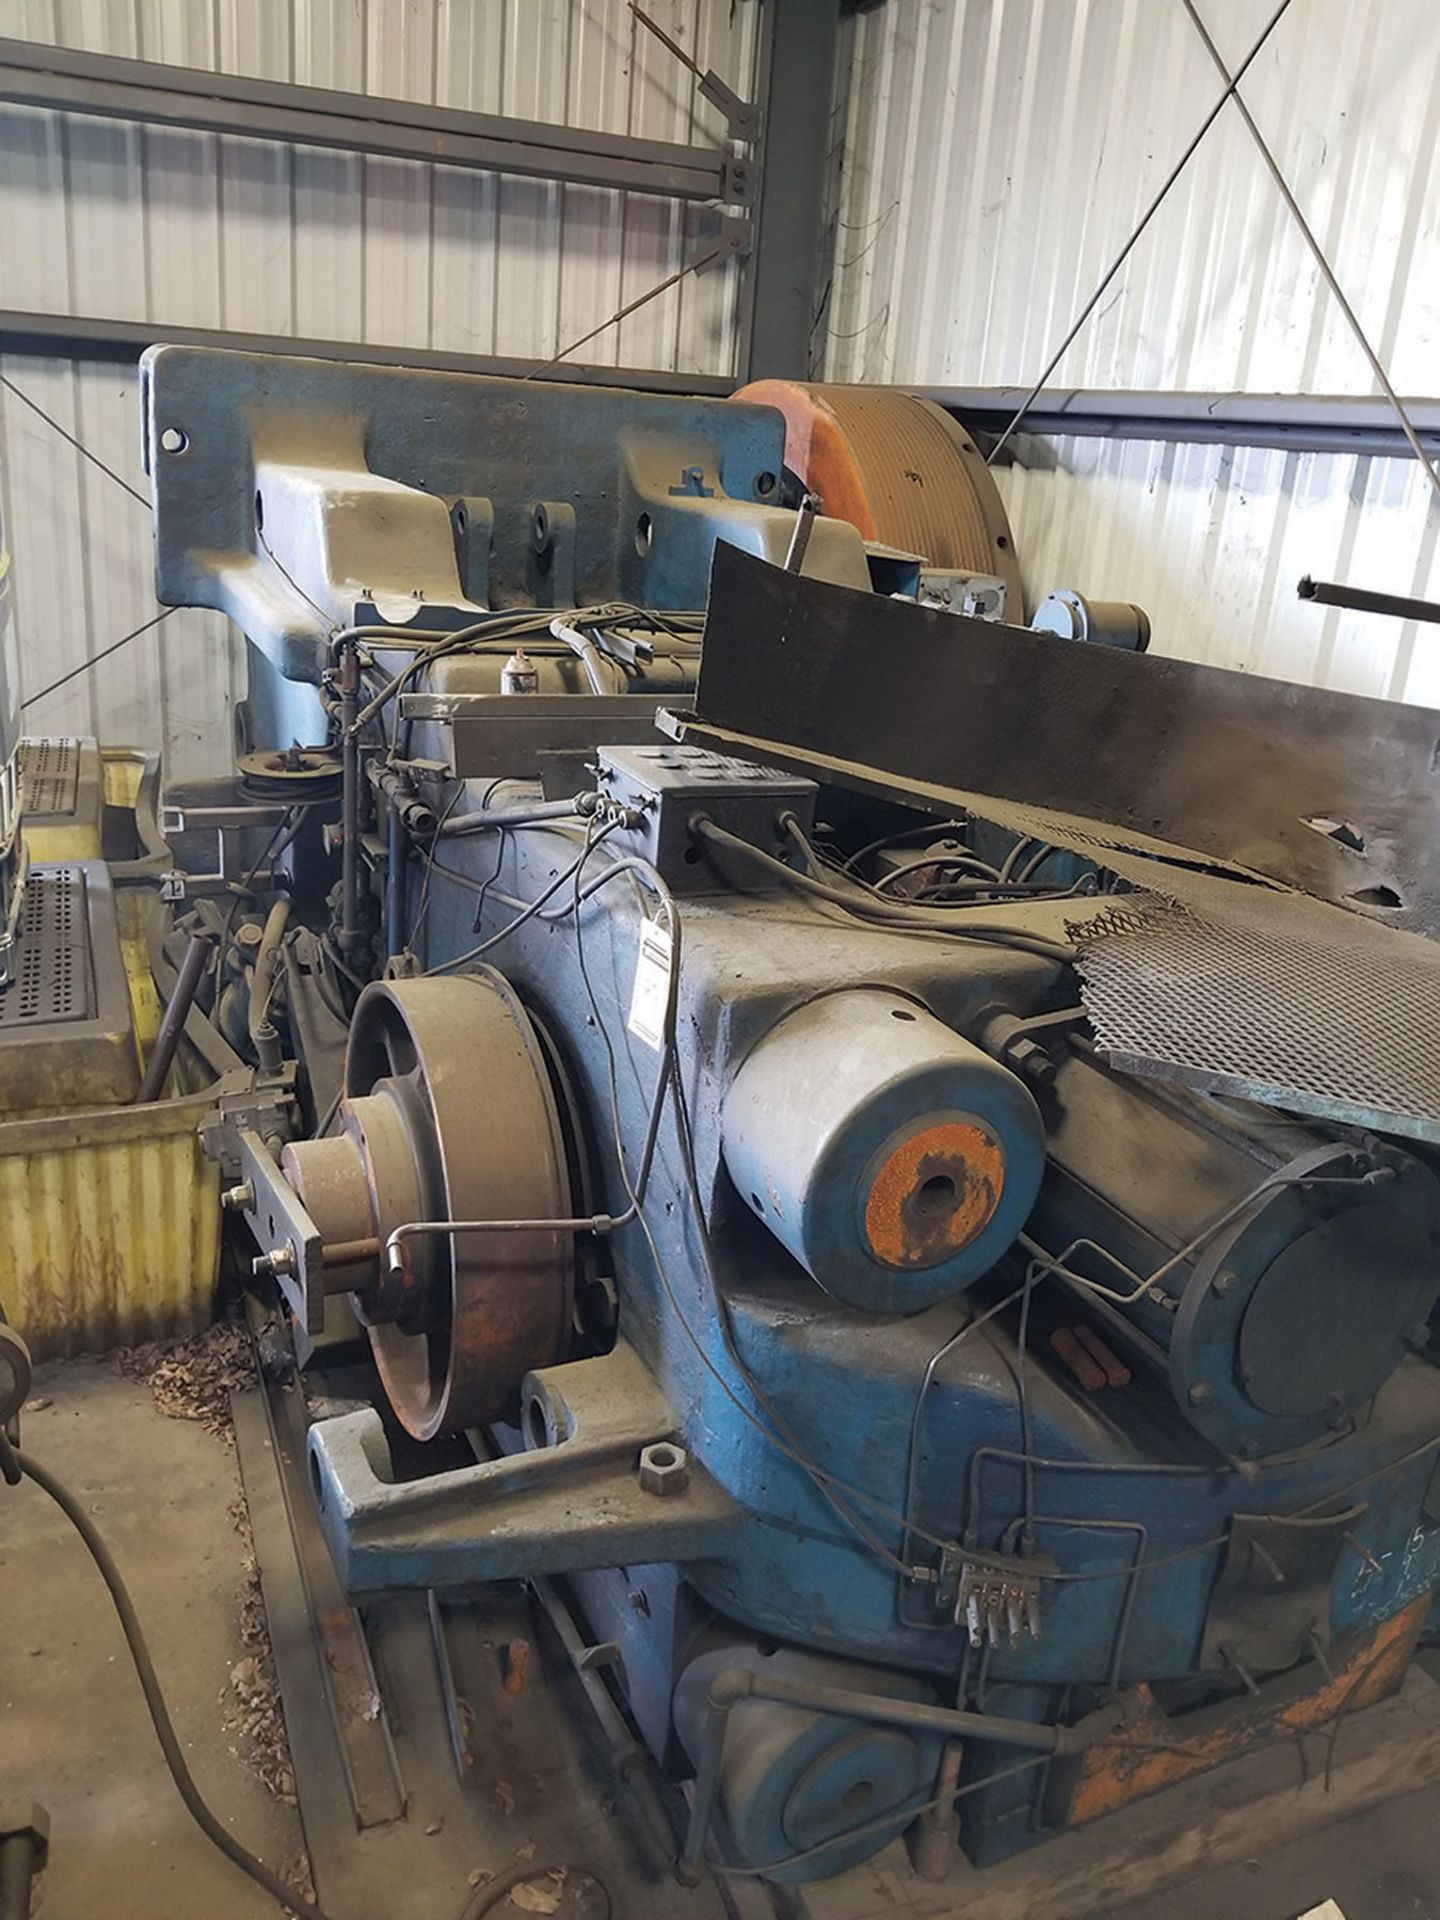 NATIONAL 1300-TON PRESS, REMOVED FROM SERVICE, NEW FLYWHEEL, S/N 21153 ***$5,500.00 RIGGING FEE*** - Image 2 of 3